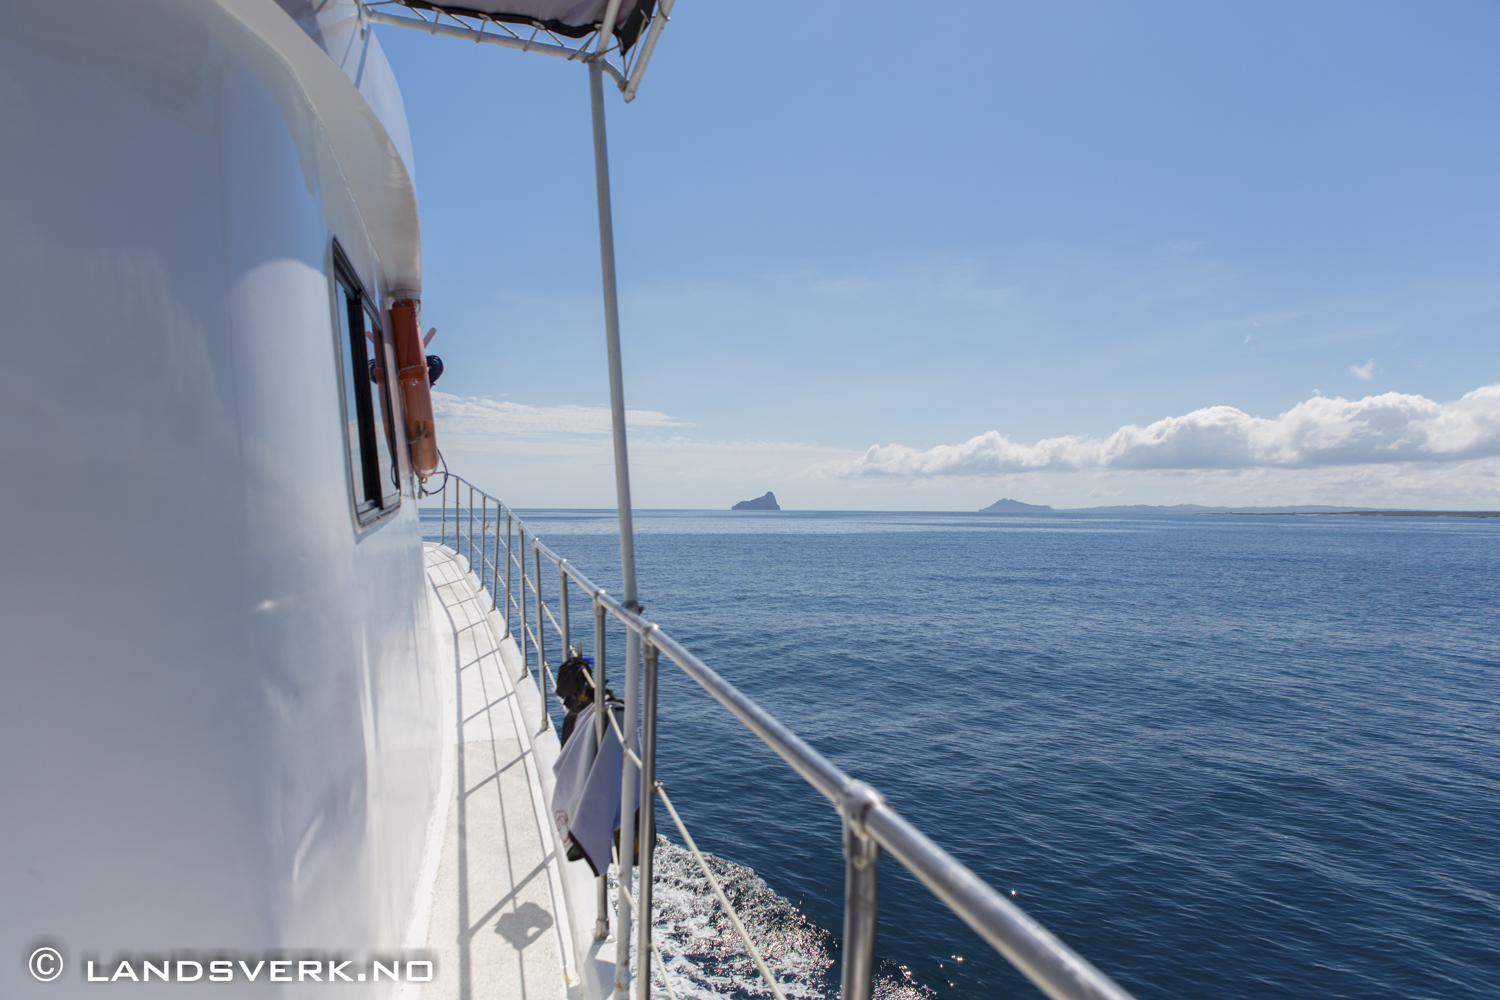 Sailing between the Galapagos Islands. 

(Canon EOS 5D Mark III / Canon EF 24-70mm f/2.8 L USM)